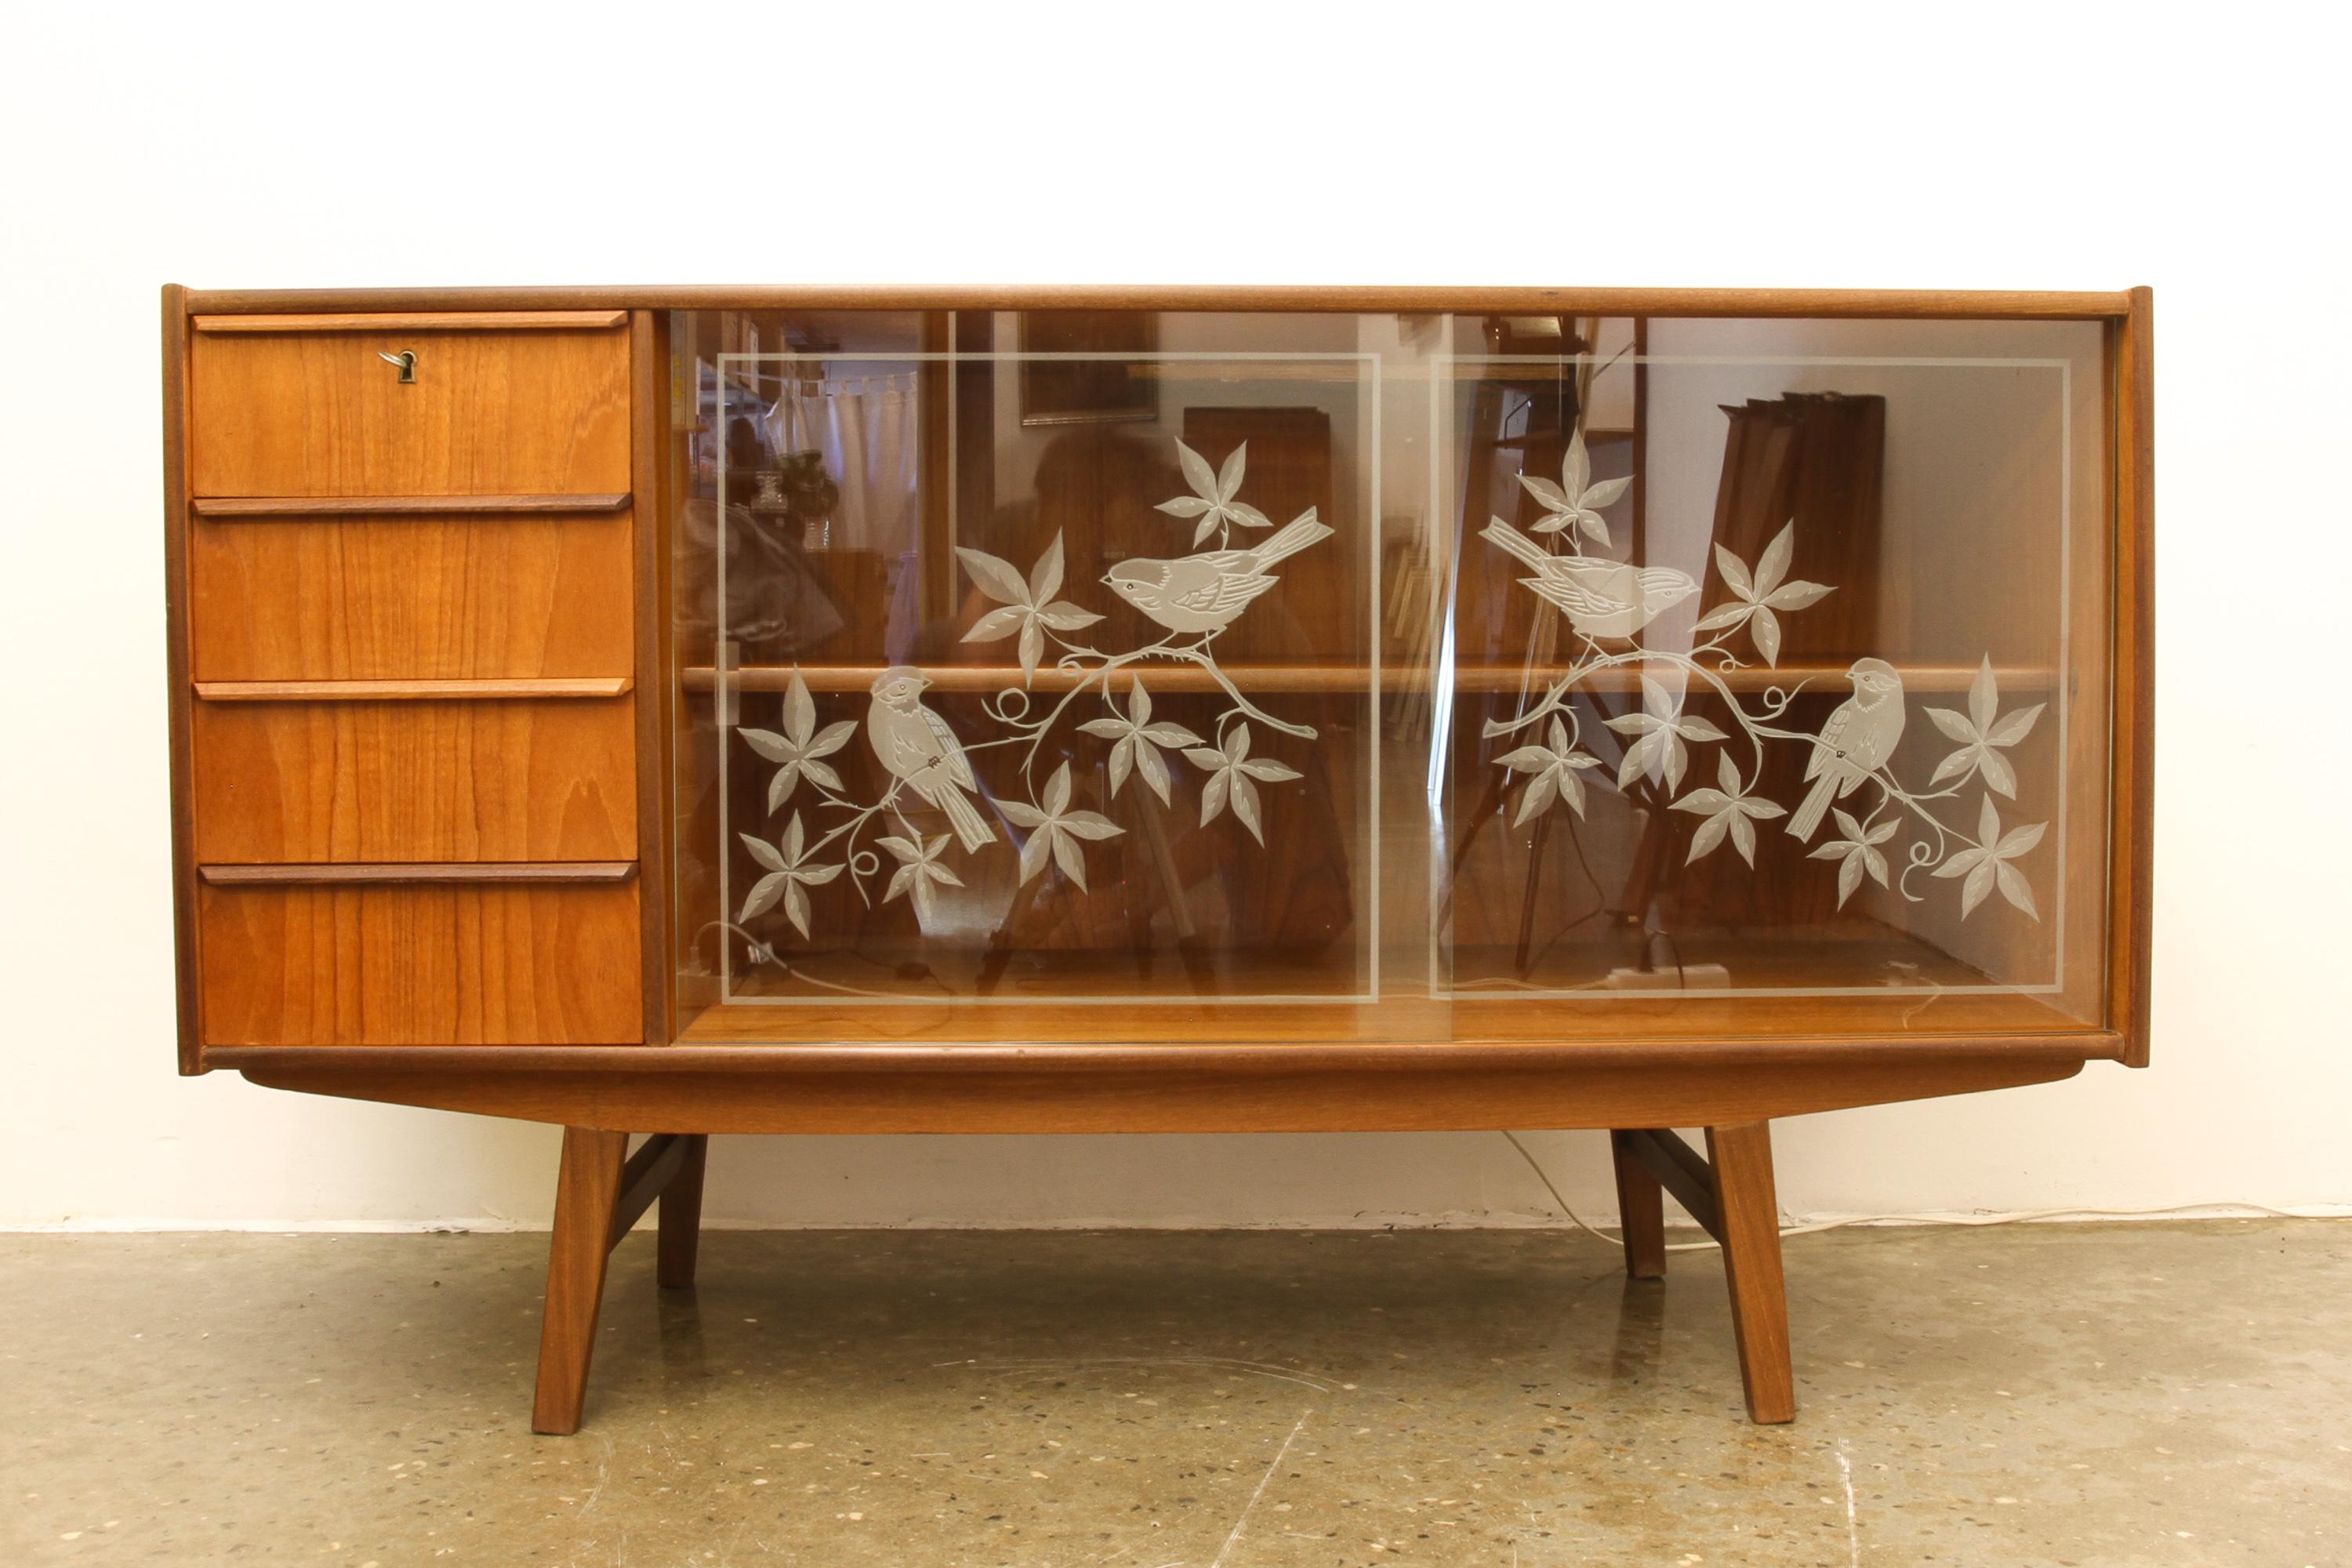 Danish teak sideboard with glass doors 1960s.
Beautiful Danish Mid-Century Modern sideboard with four drawers and compartment with one shelf. Double glass doors with etched bird motif. Built in light behind the glass doors. Standing on four